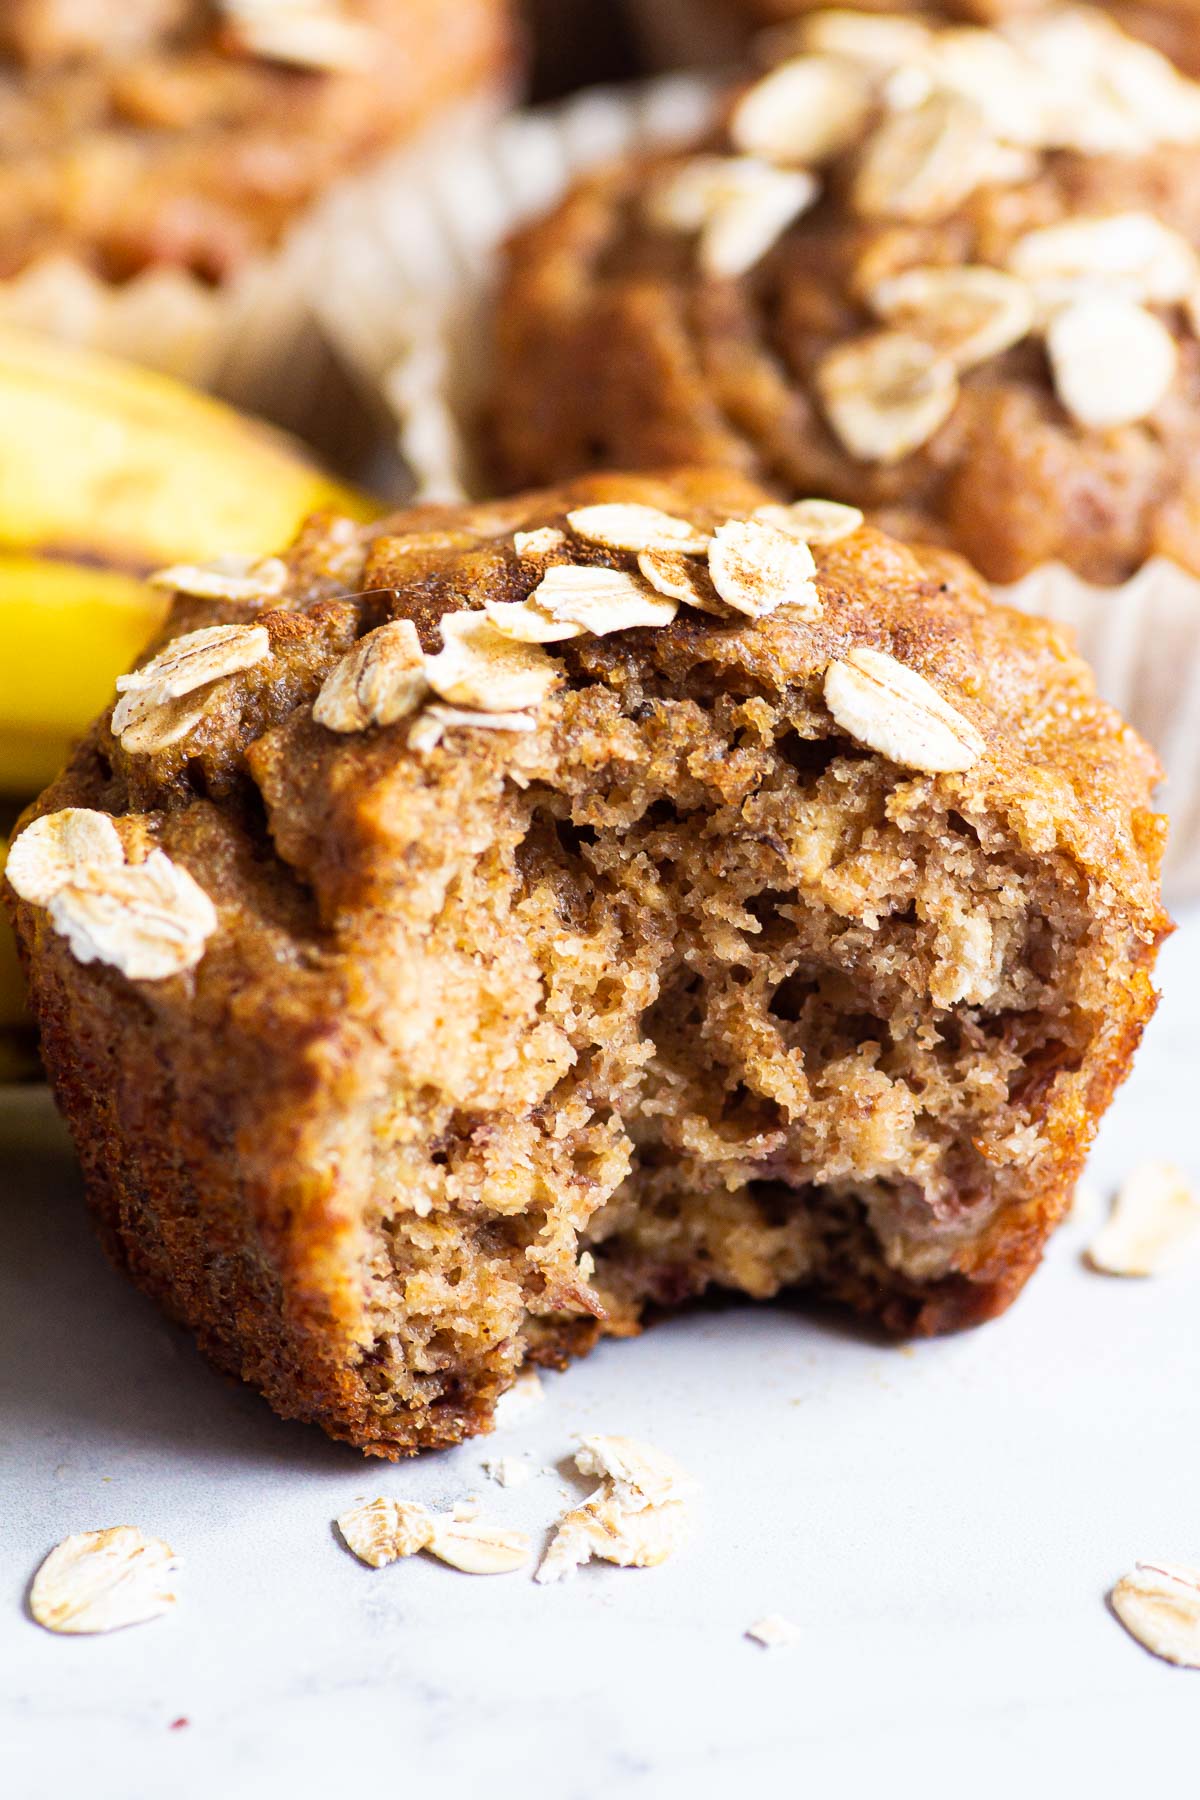 Banana oatmeal muffins with oats on top with a bite taken out of one.